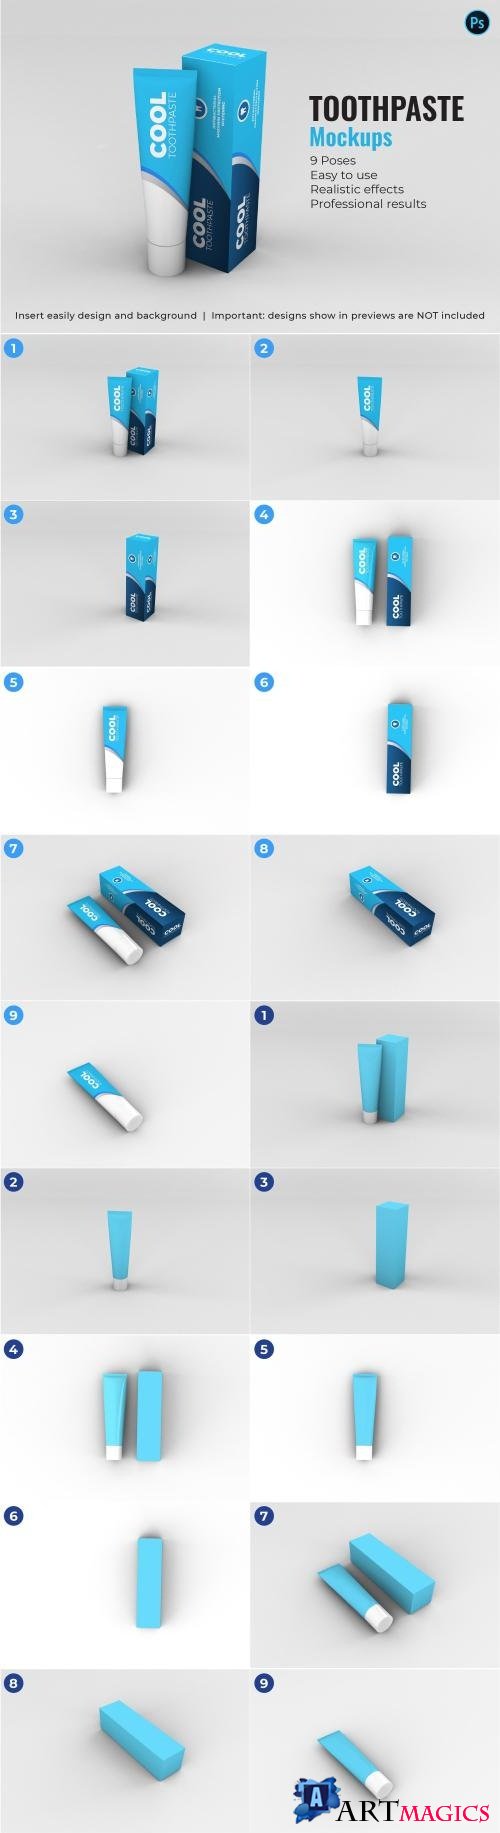 Toothpaste Mockups - 9 Poses - 3340924